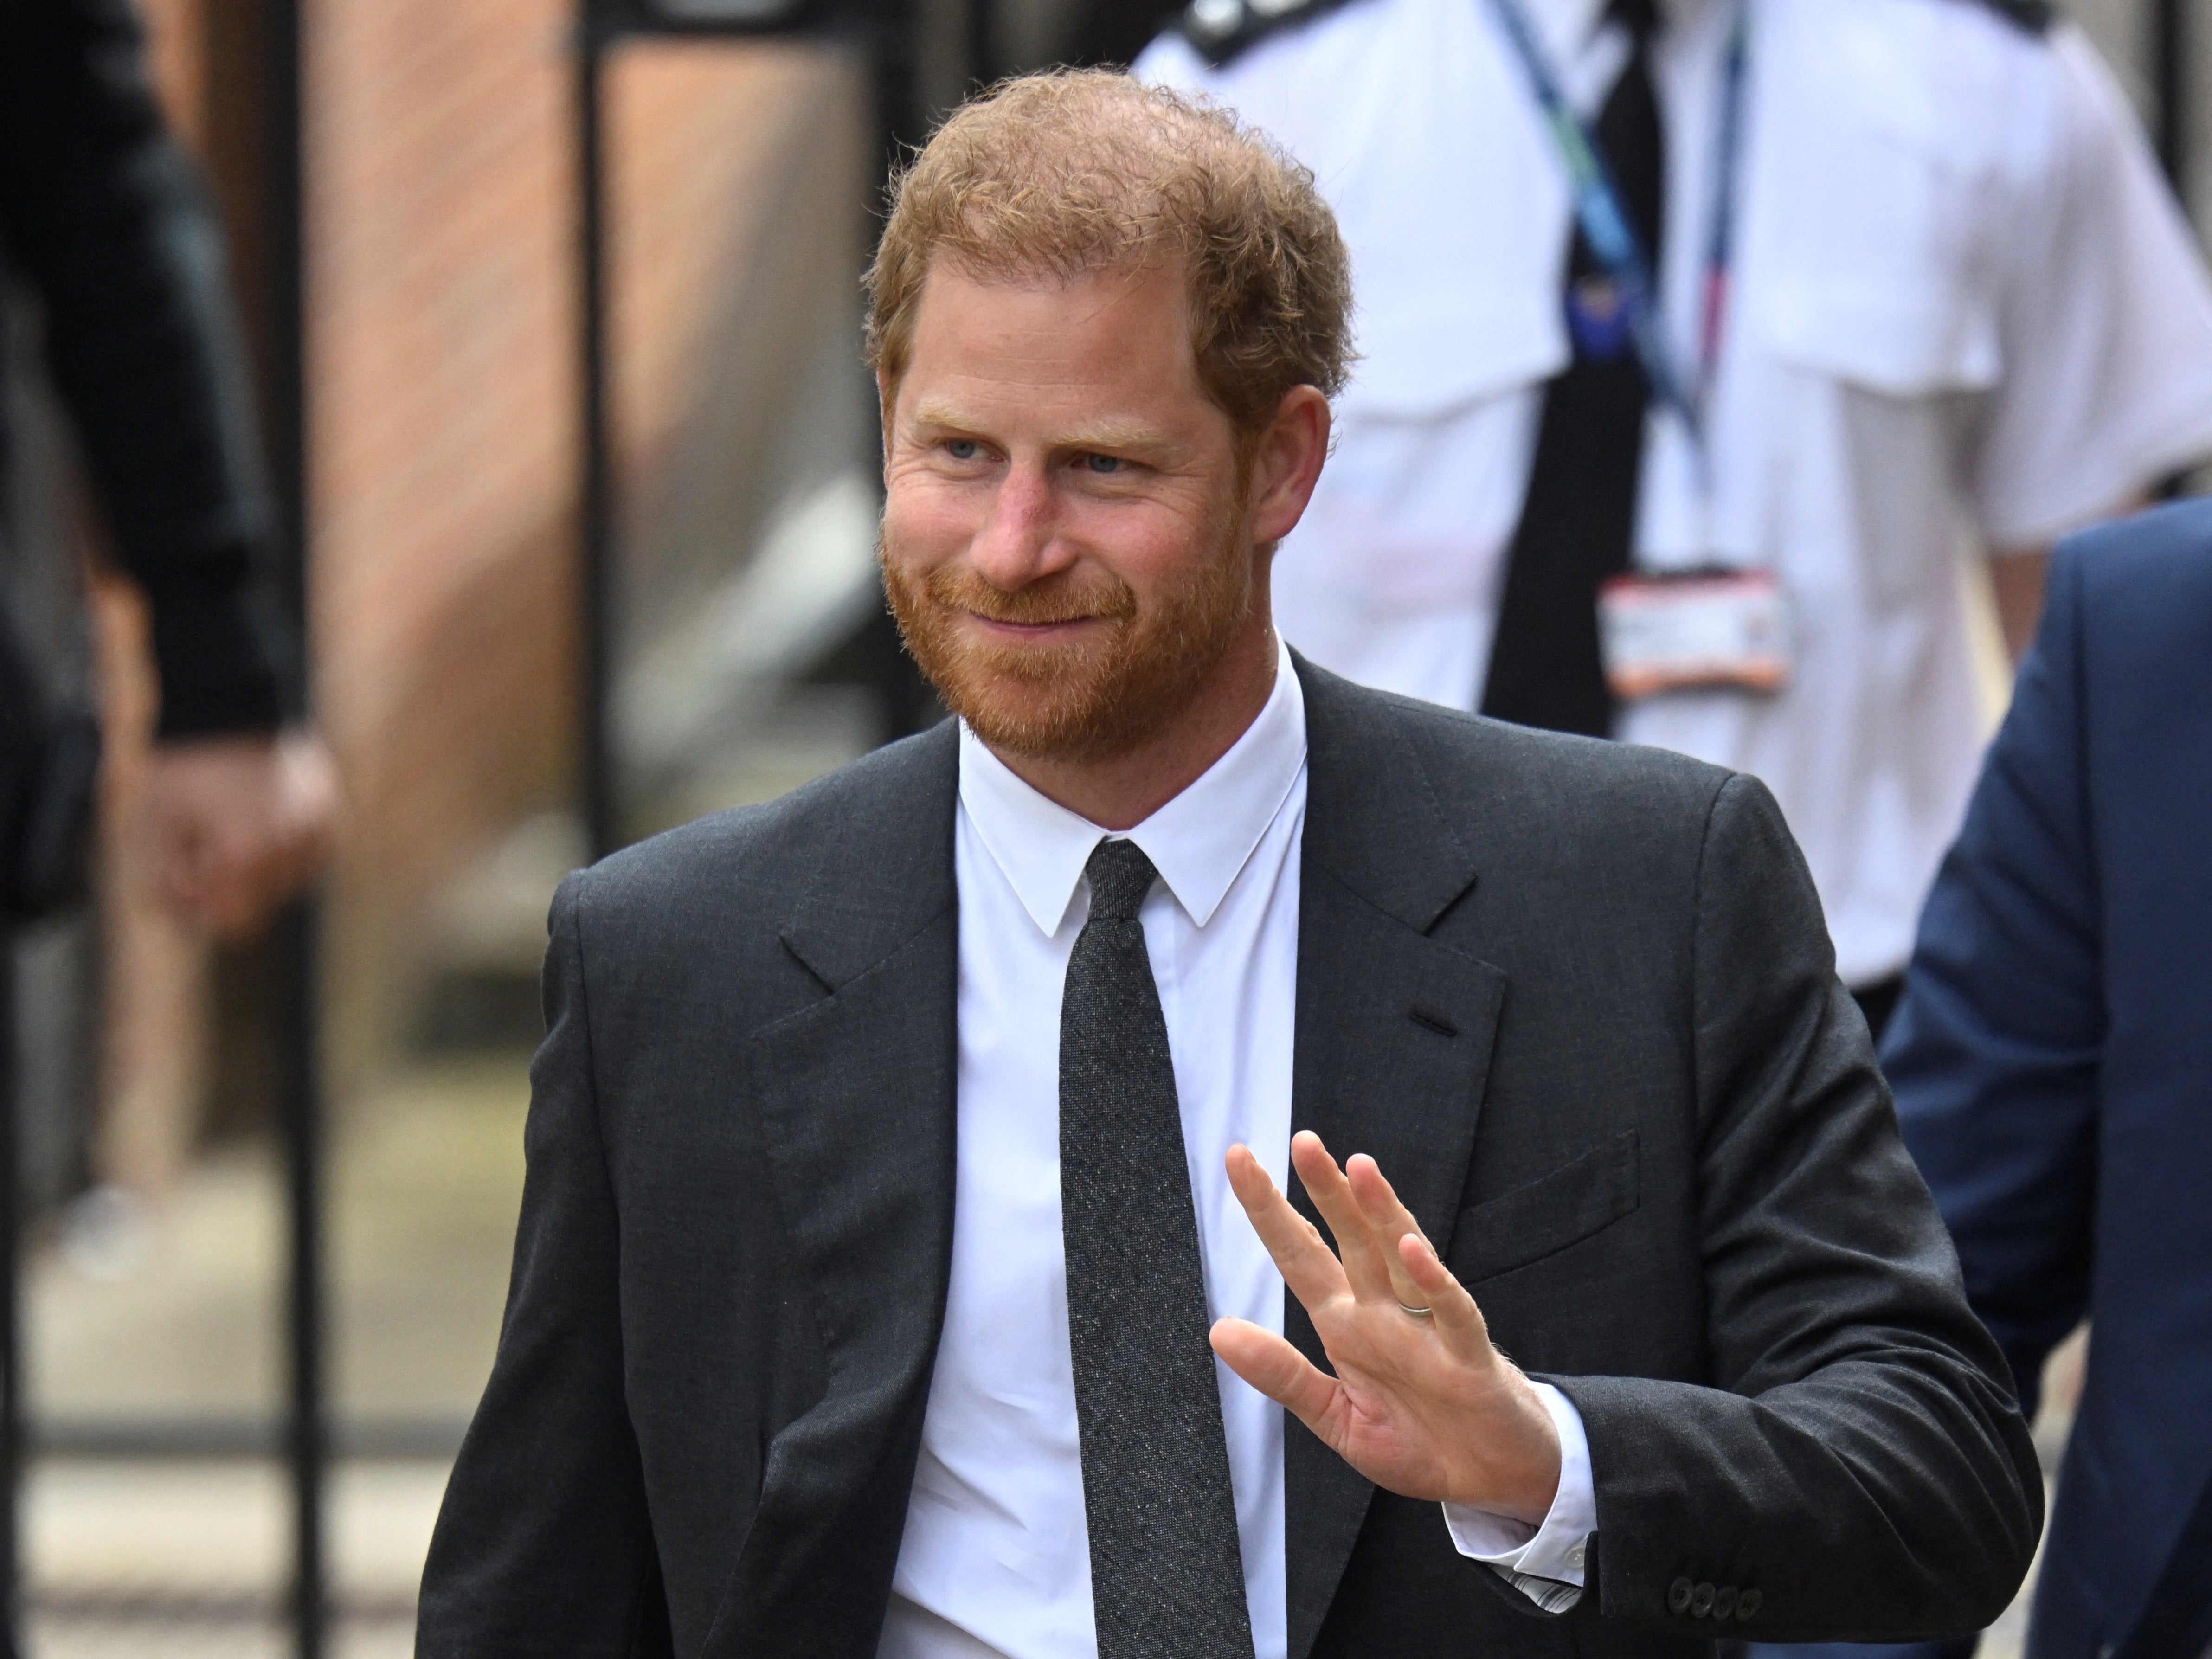 Prince Harry is attending the coronation ceremony this weekend